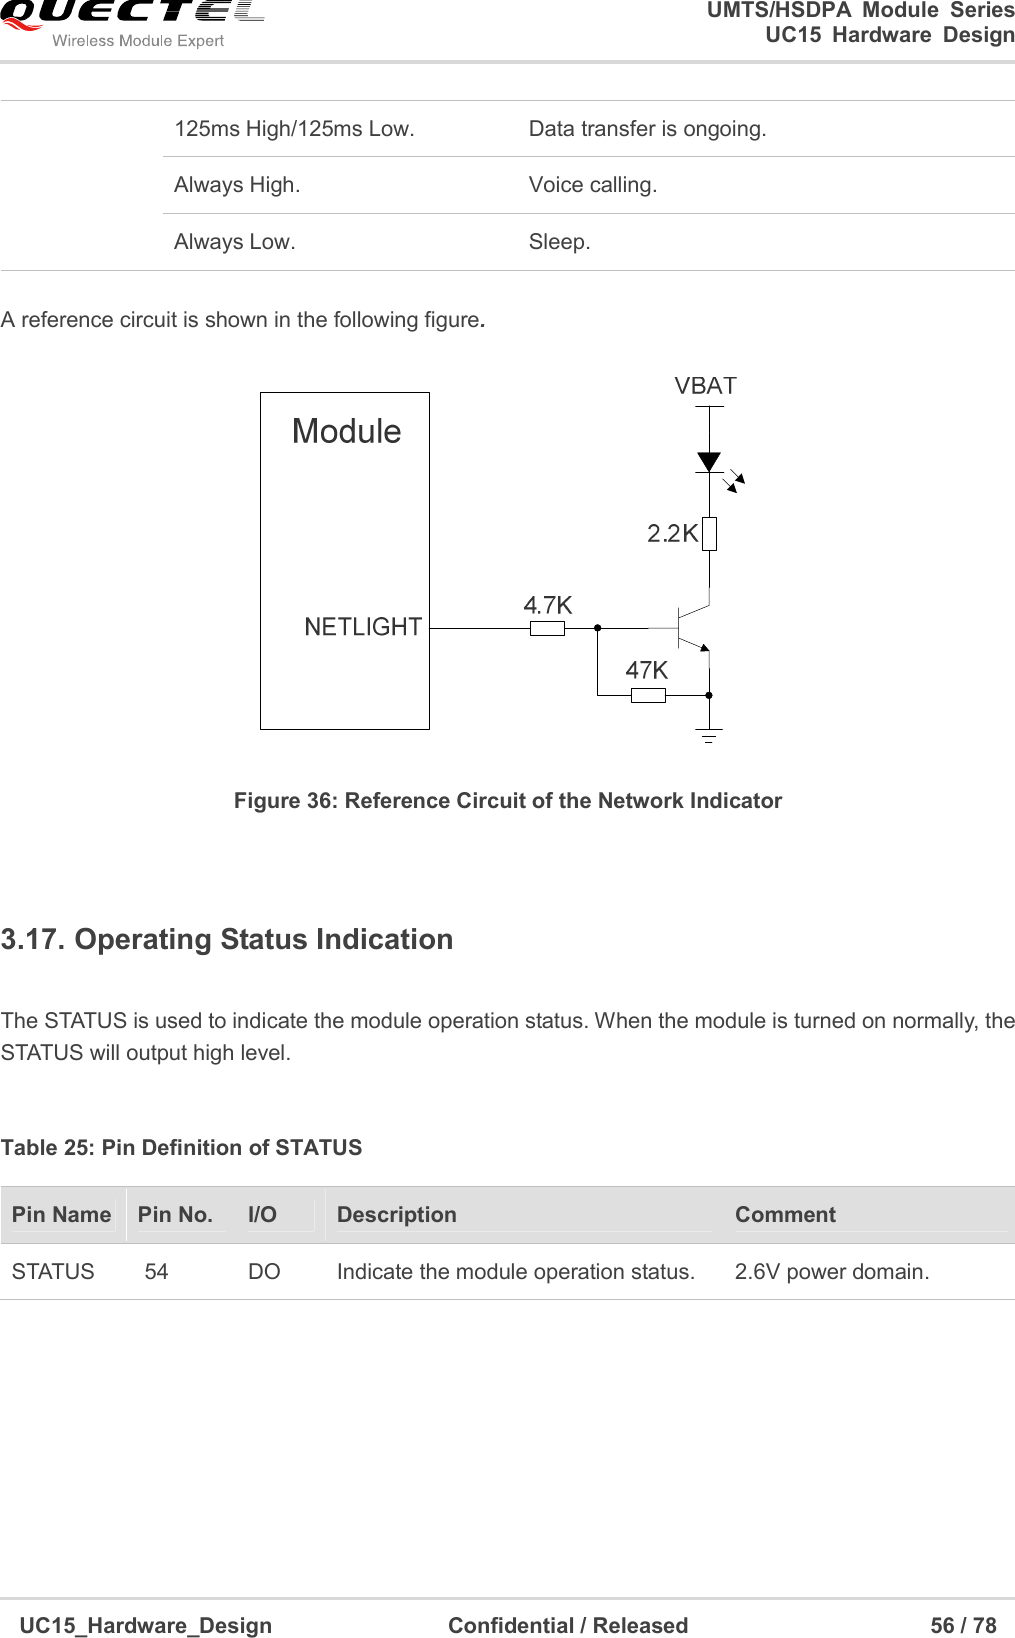                                                                        UMTS/HSDPA  Module  Series                                                                 UC15 Hardware Design  UC15_Hardware_Design                                Confidential / Released                                            56 / 78     A reference circuit is shown in the following figure.  Figure 36: Reference Circuit of the Network Indicator  3.17. Operating Status Indication  The STATUS is used to indicate the module operation status. When the module is turned on normally, the STATUS will output high level.    Table 25: Pin Definition of STATUS        125ms High/125ms Low.  Data transfer is ongoing. Always High.  Voice calling. Always Low.  Sleep. Pin Name  Pin No.  I/O  Description    Comment STATUS  54  DO  Indicate the module operation status.  2.6V power domain. 